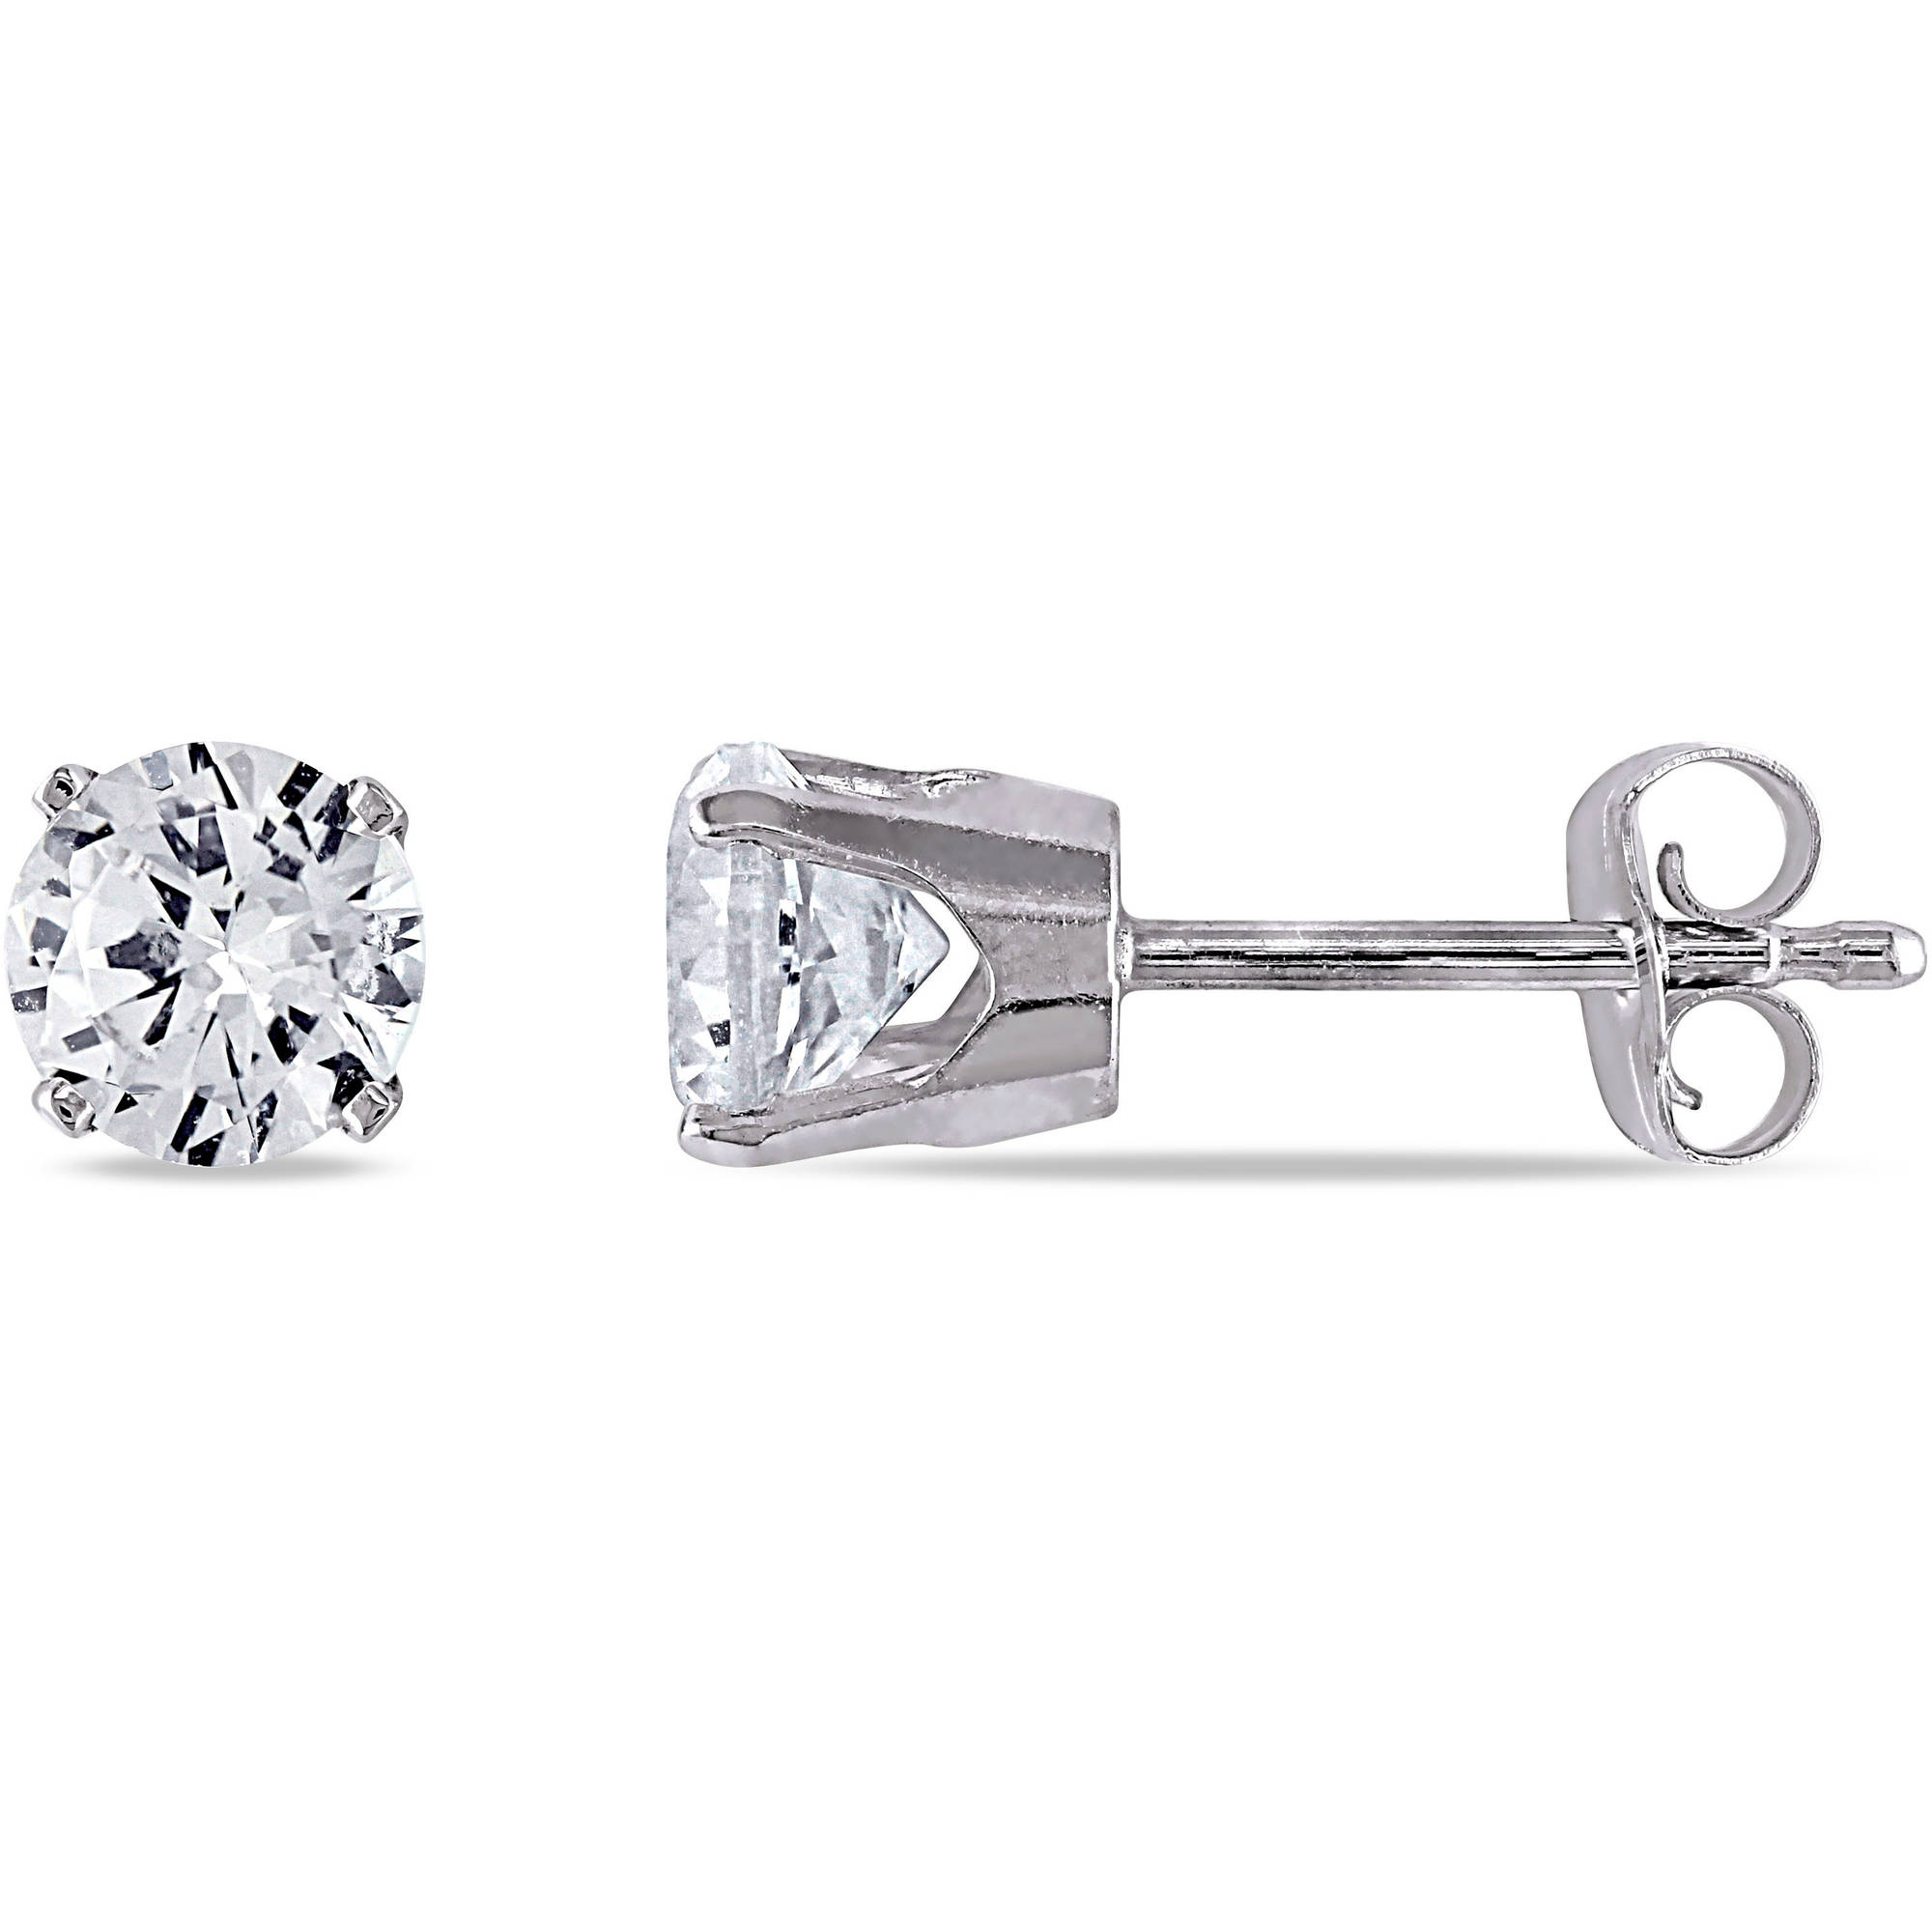 1-1/5 Carat T.G.W. Created White Sapphire 10kt White Gold Solitaire Earrings - image 1 of 4